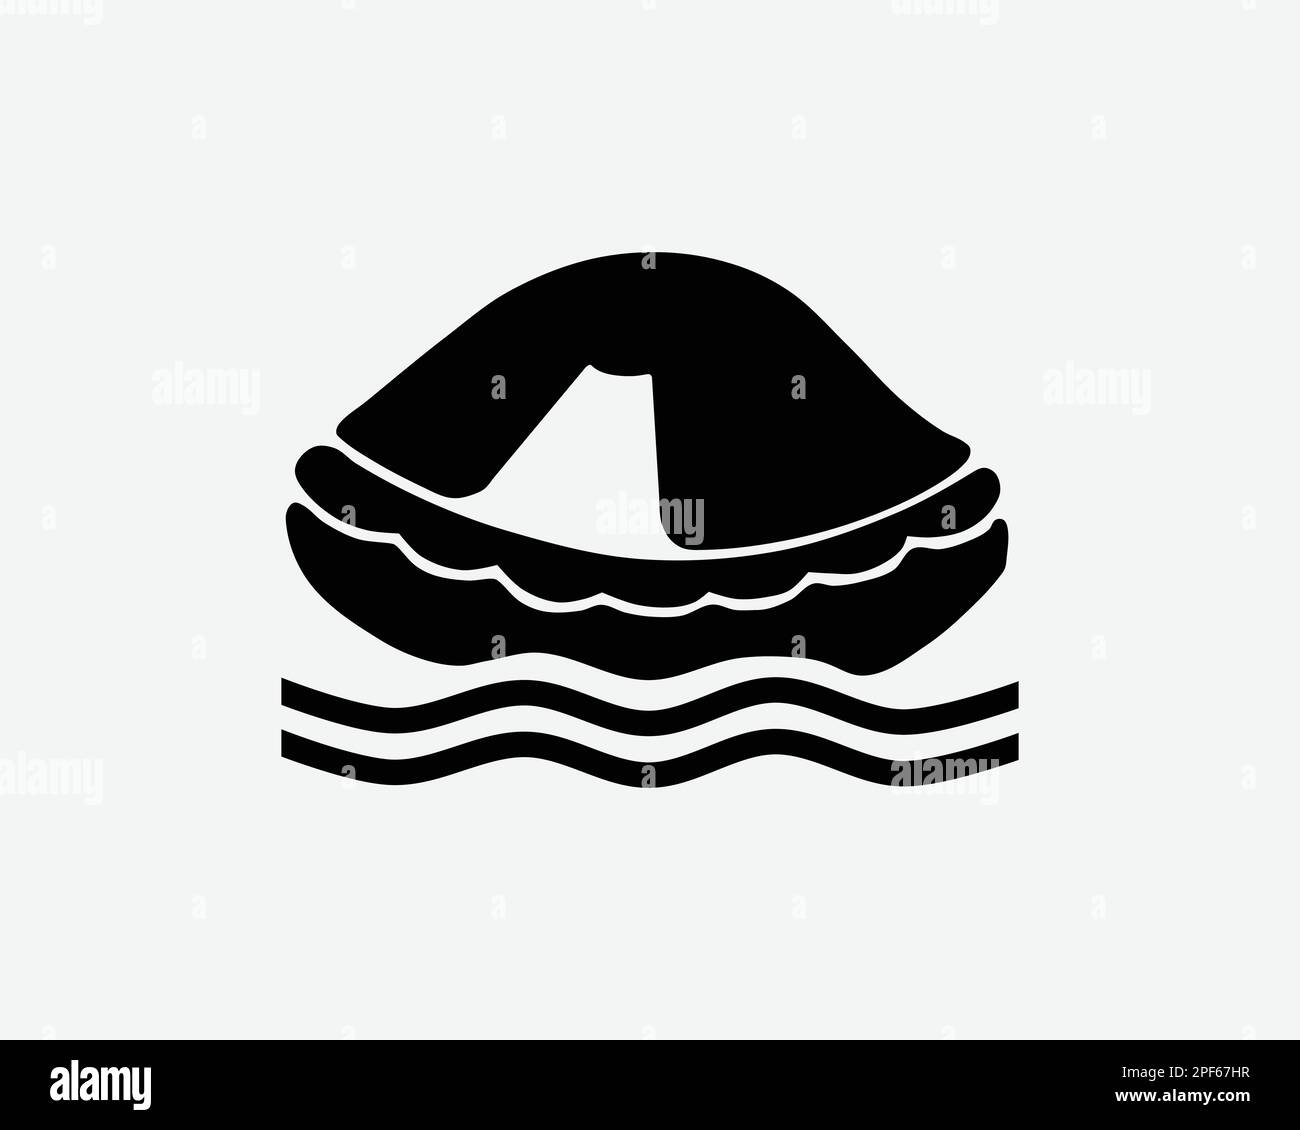 Liferaft Emergency Rescue Inflatable Life Raft Floating Black White Silhouette Sign Symbol Icon Graphic Clipart Artwork Illustration Pictogram Vector Stock Vector